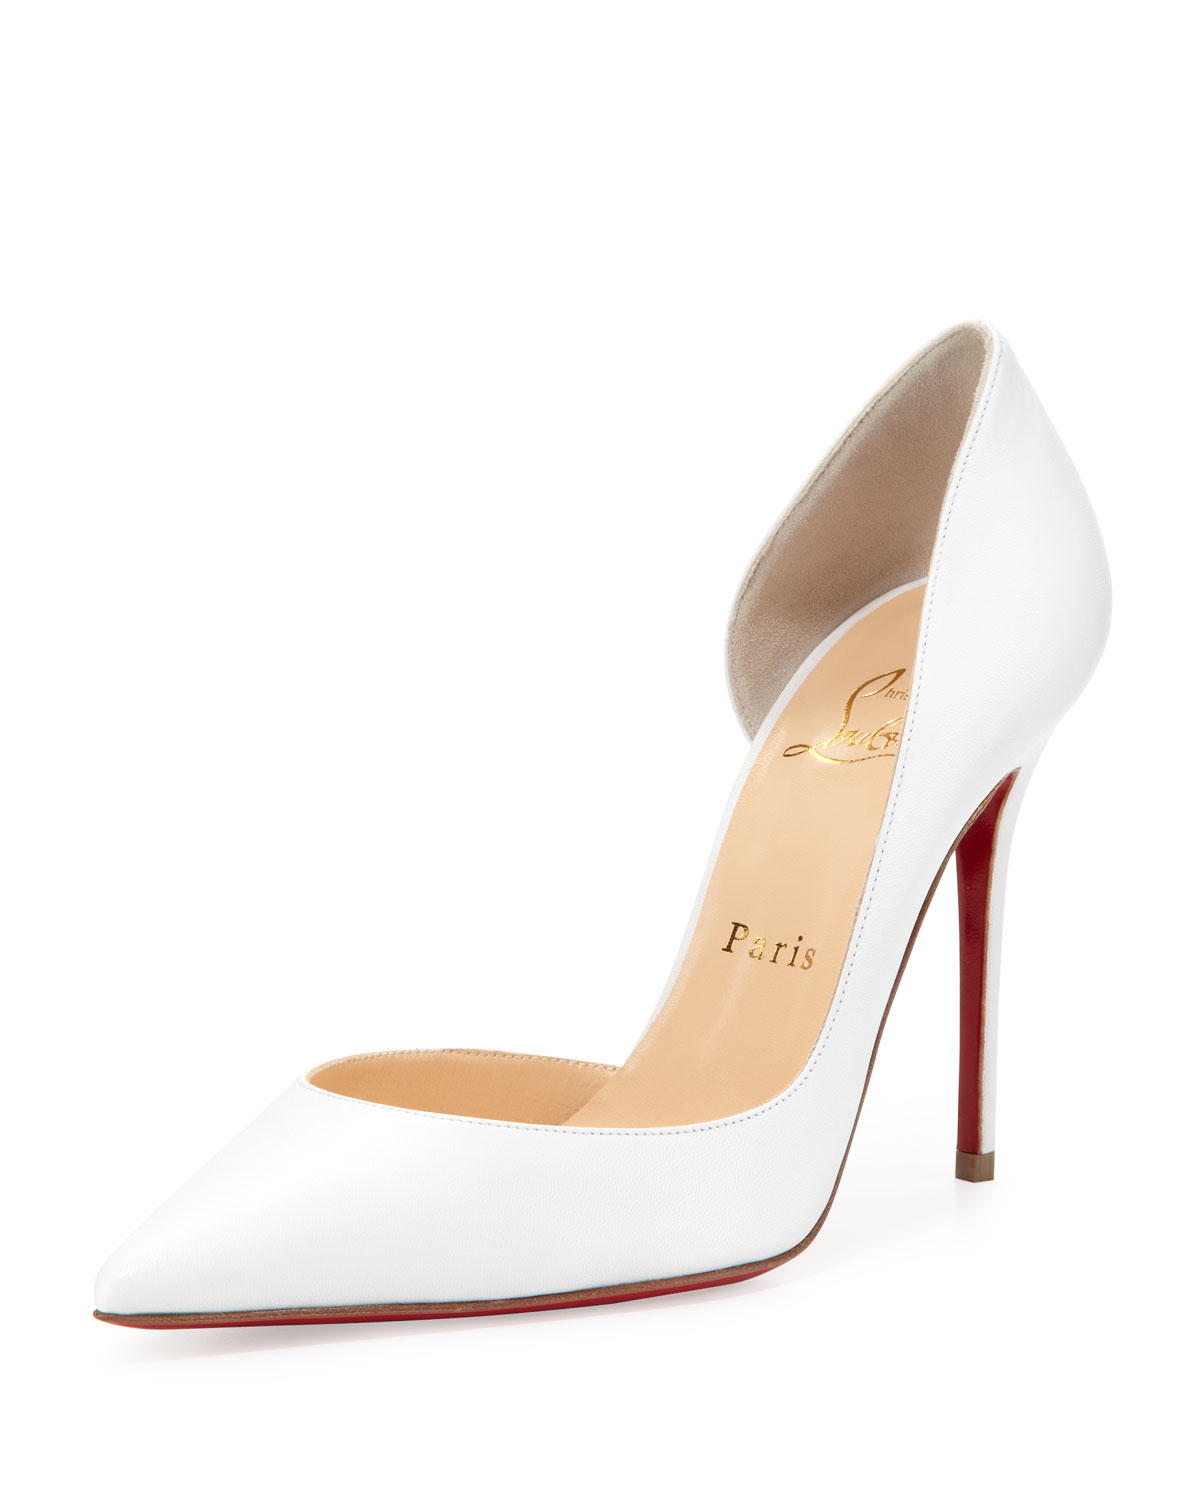 louboutin prices - Christian louboutin Iriza Red Sole Half-dorsay Pump in Red (WHITE ...